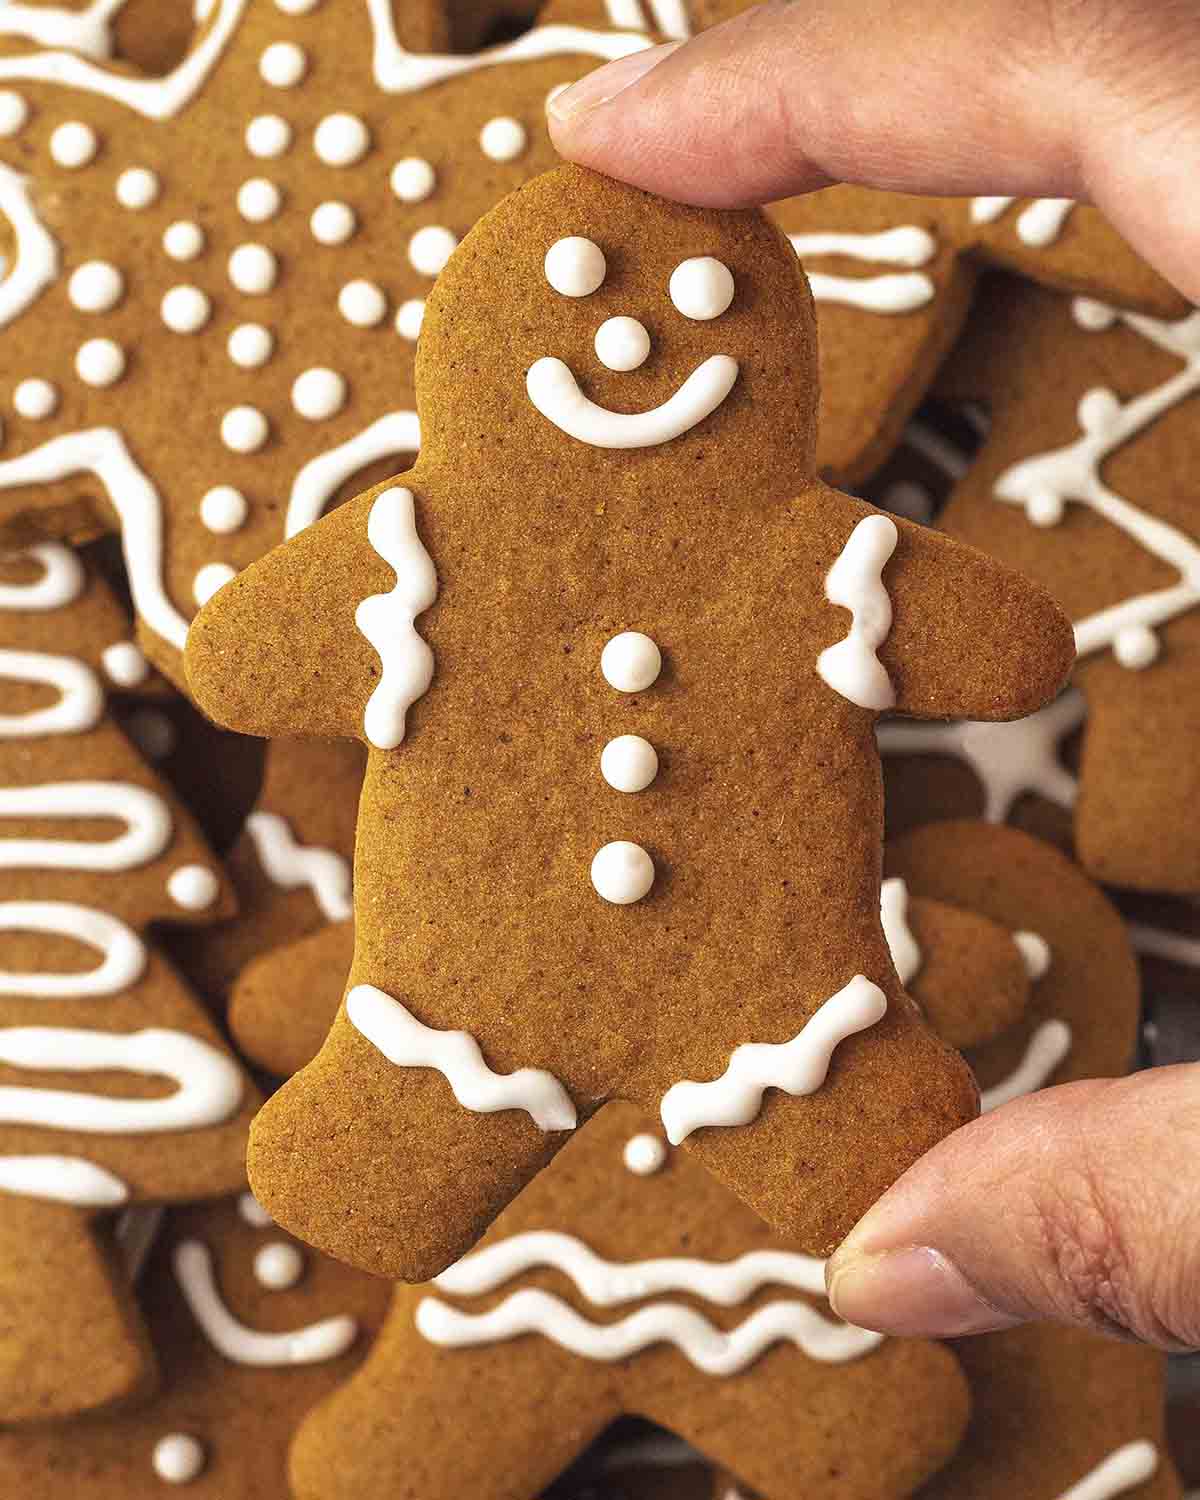 A hand holding up a gingerbread man cookie that has been decorated with vegan royal icing.